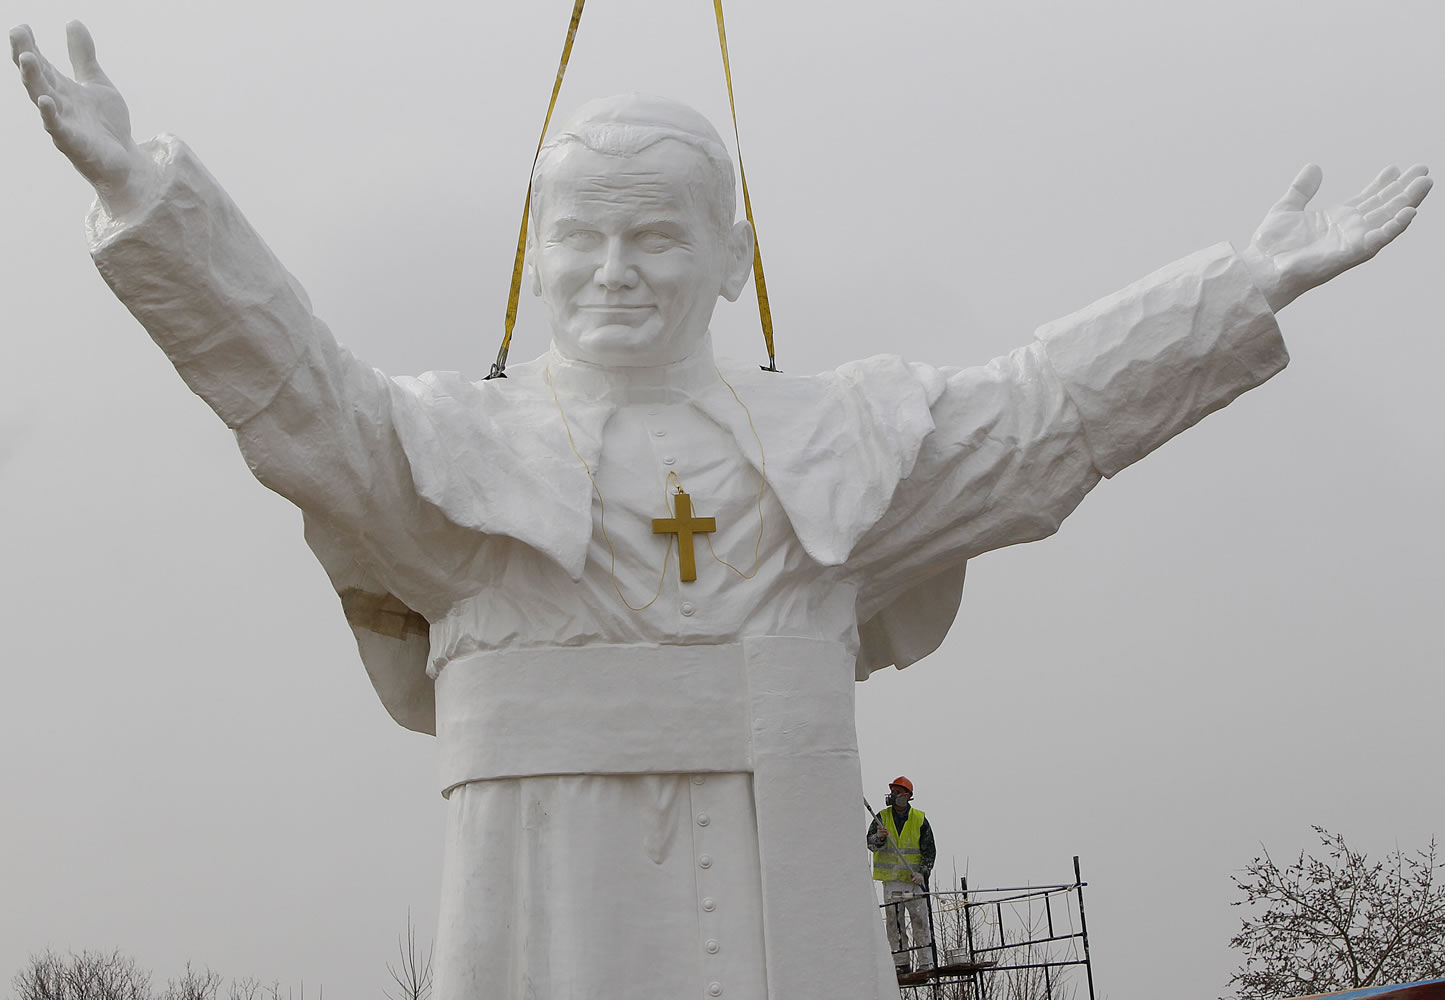 A worker adds finishing touches to a giant statue of the late Pope John Paul II.